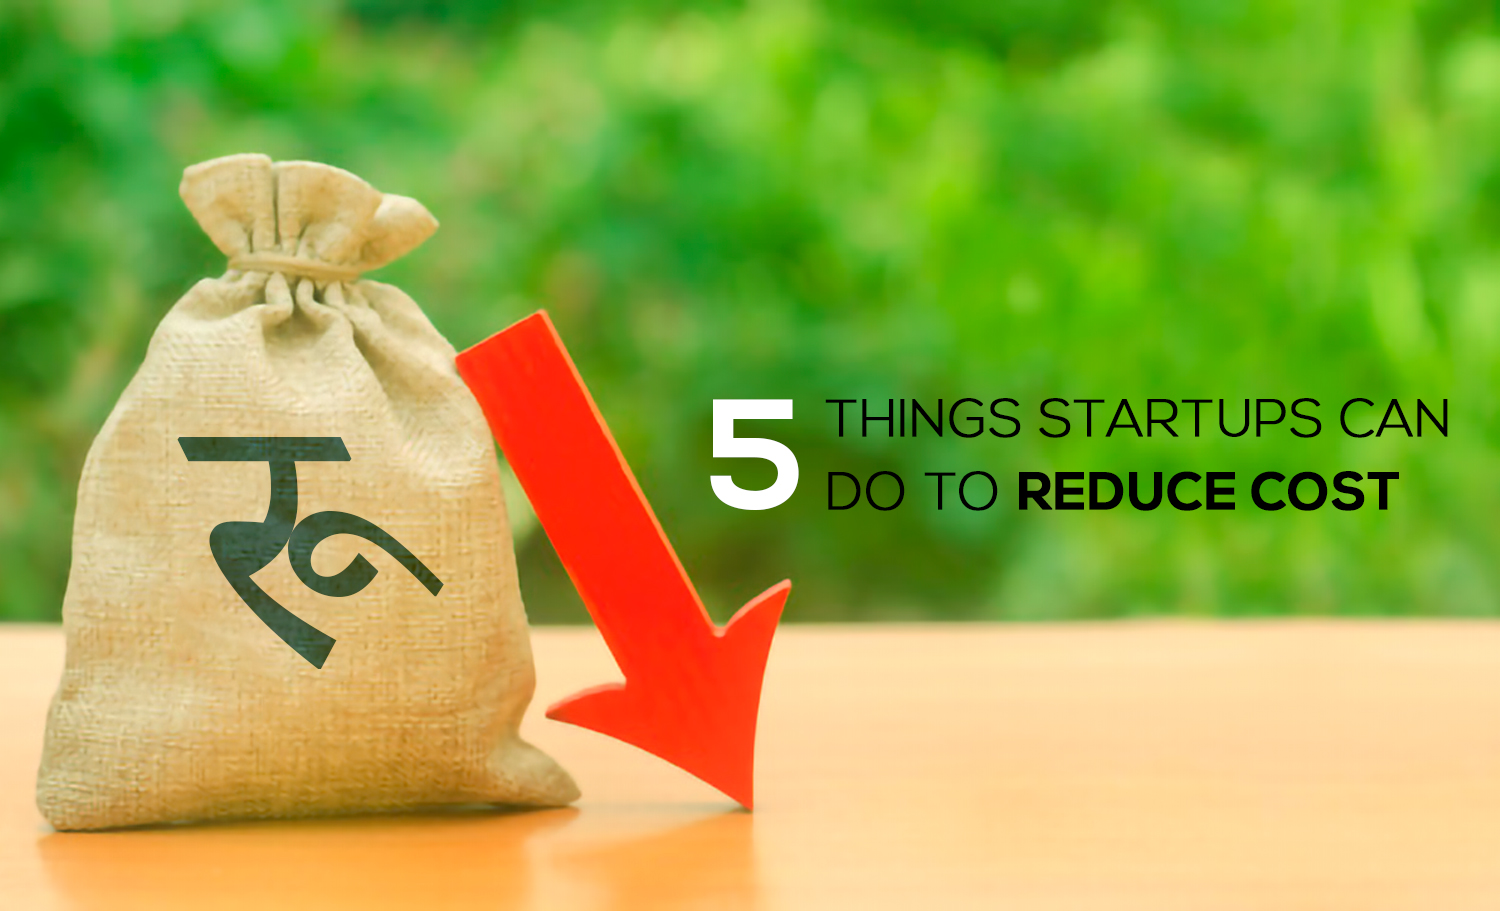 5 Things Startups can do to Reduce Cost